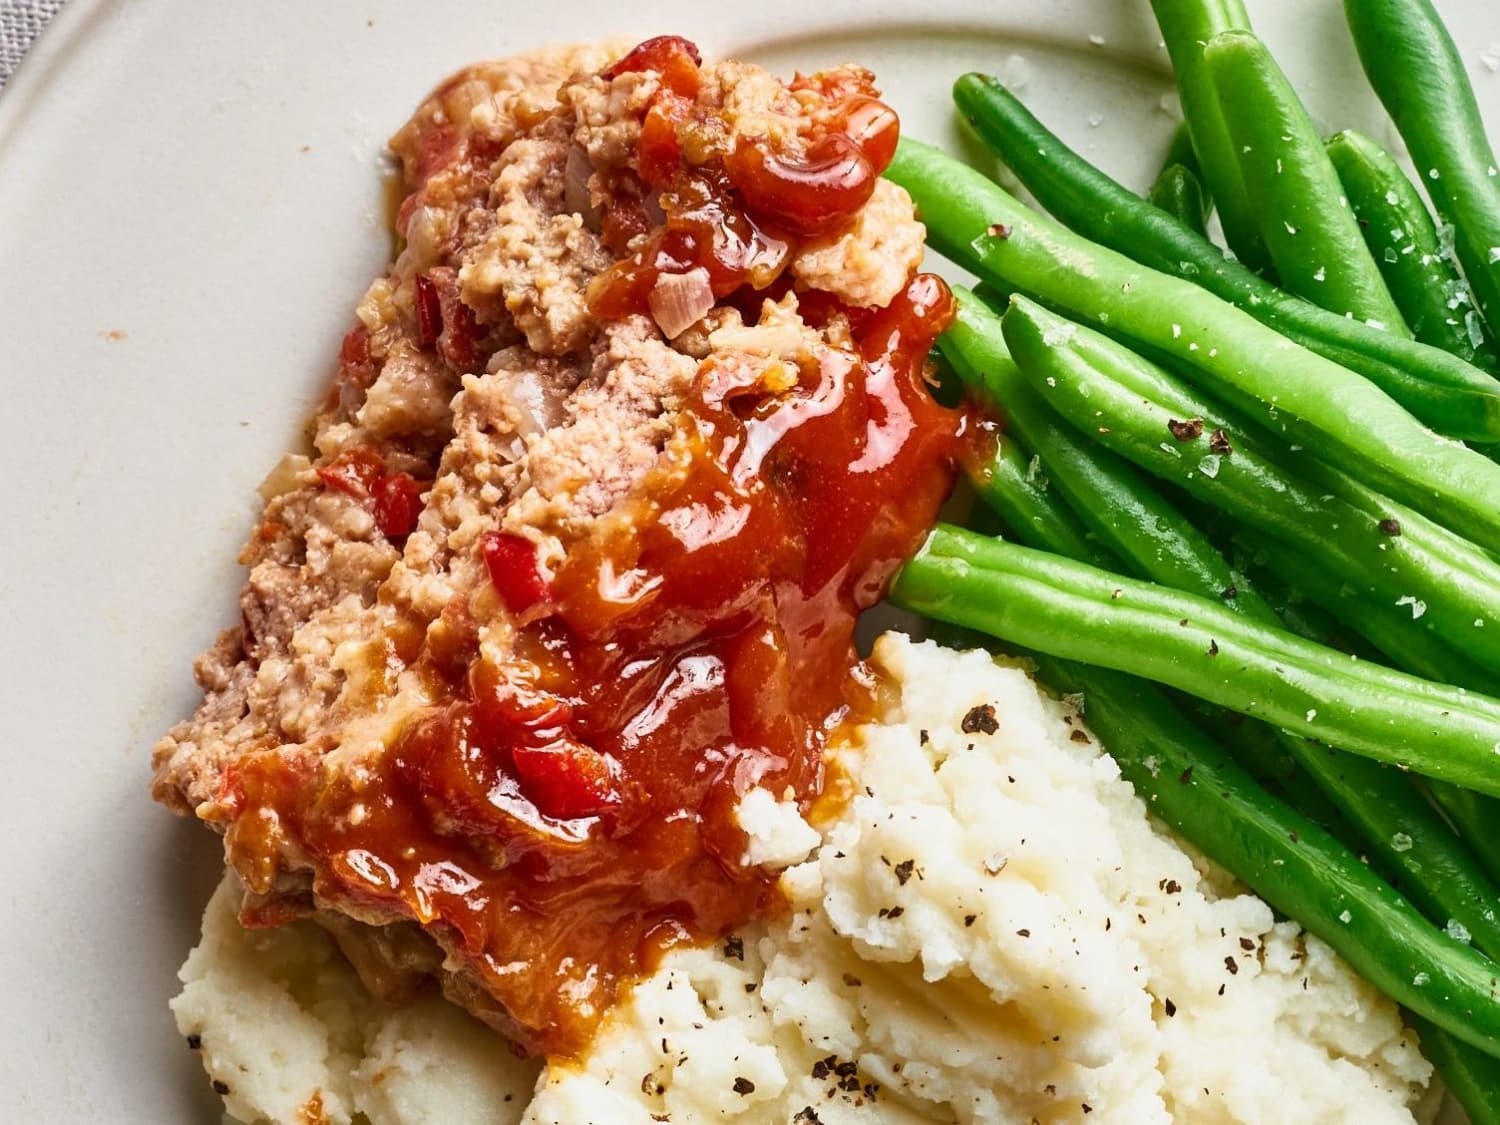 This Beloved Condiment Is the Key to the Most Flavorful Meatloaf (No, It’s Not Ketchup)